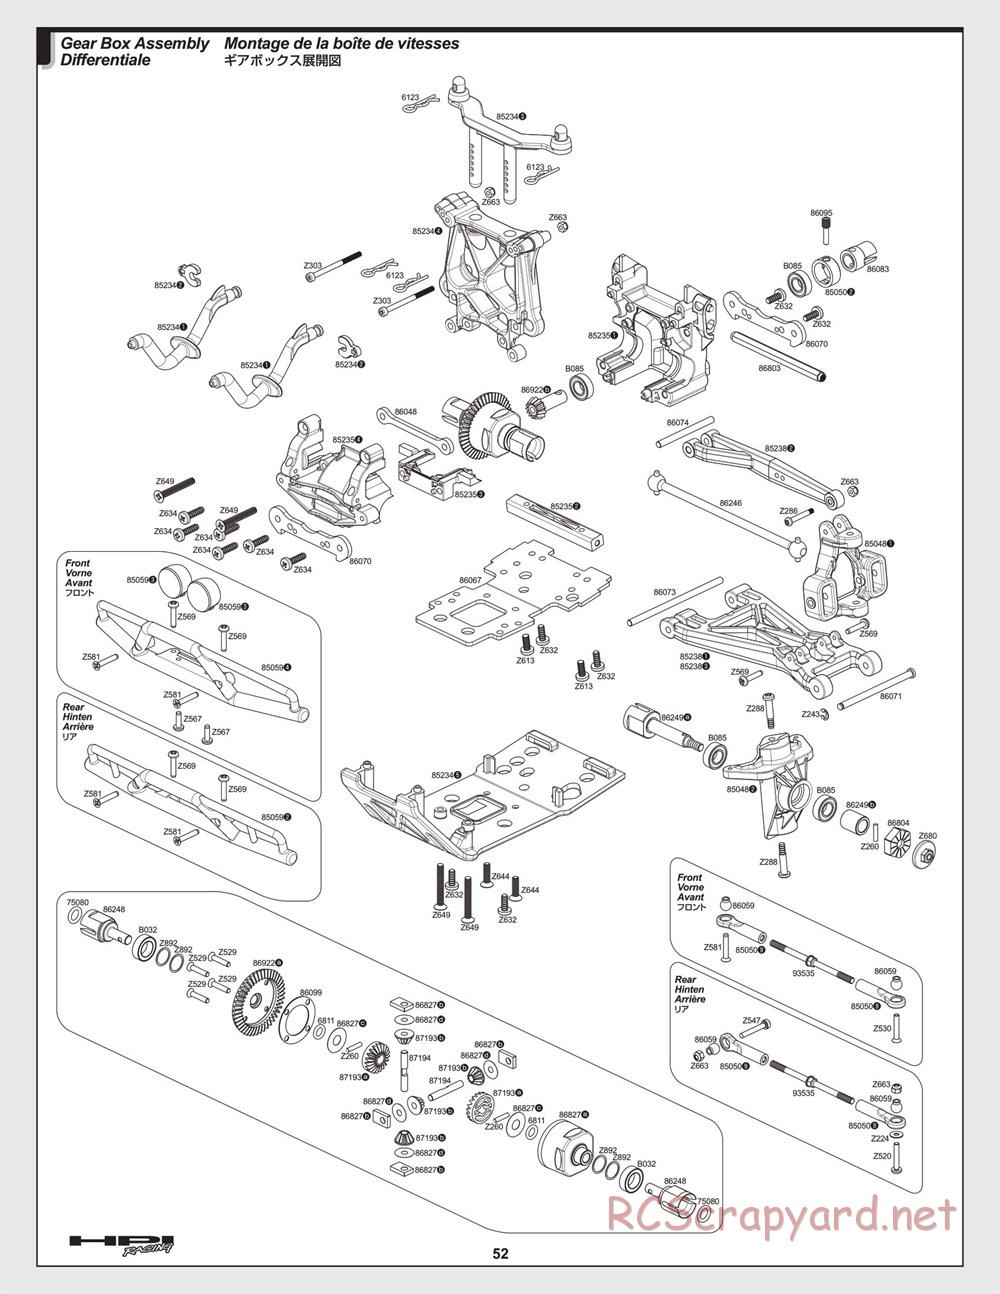 HPI - Savage XL 5.9 - Exploded View - Page 52